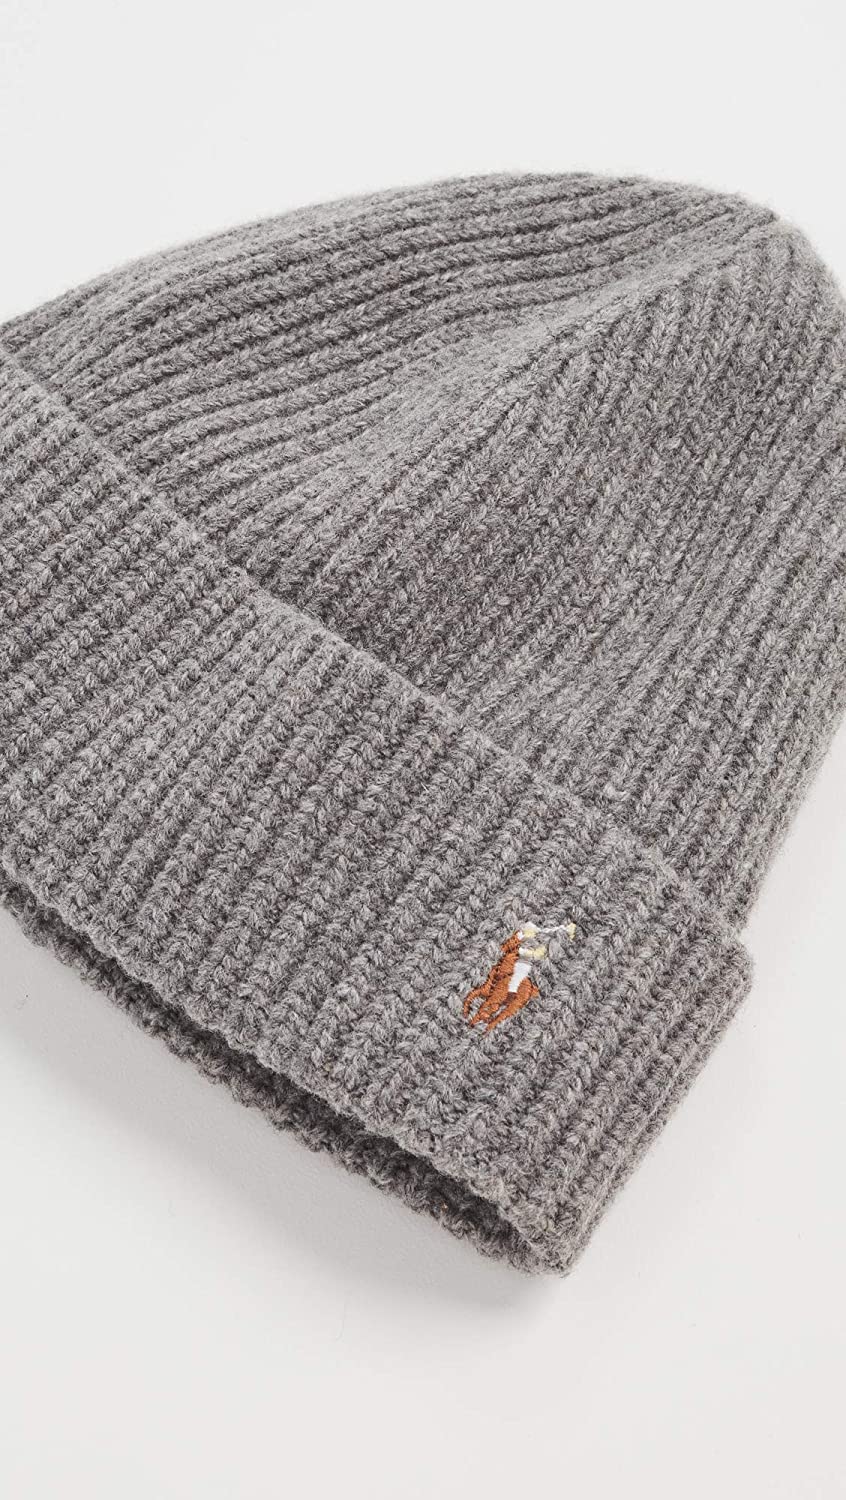 Polo Ralph Lauren Signature Cuff Knit Hat OS - image 2 of 3